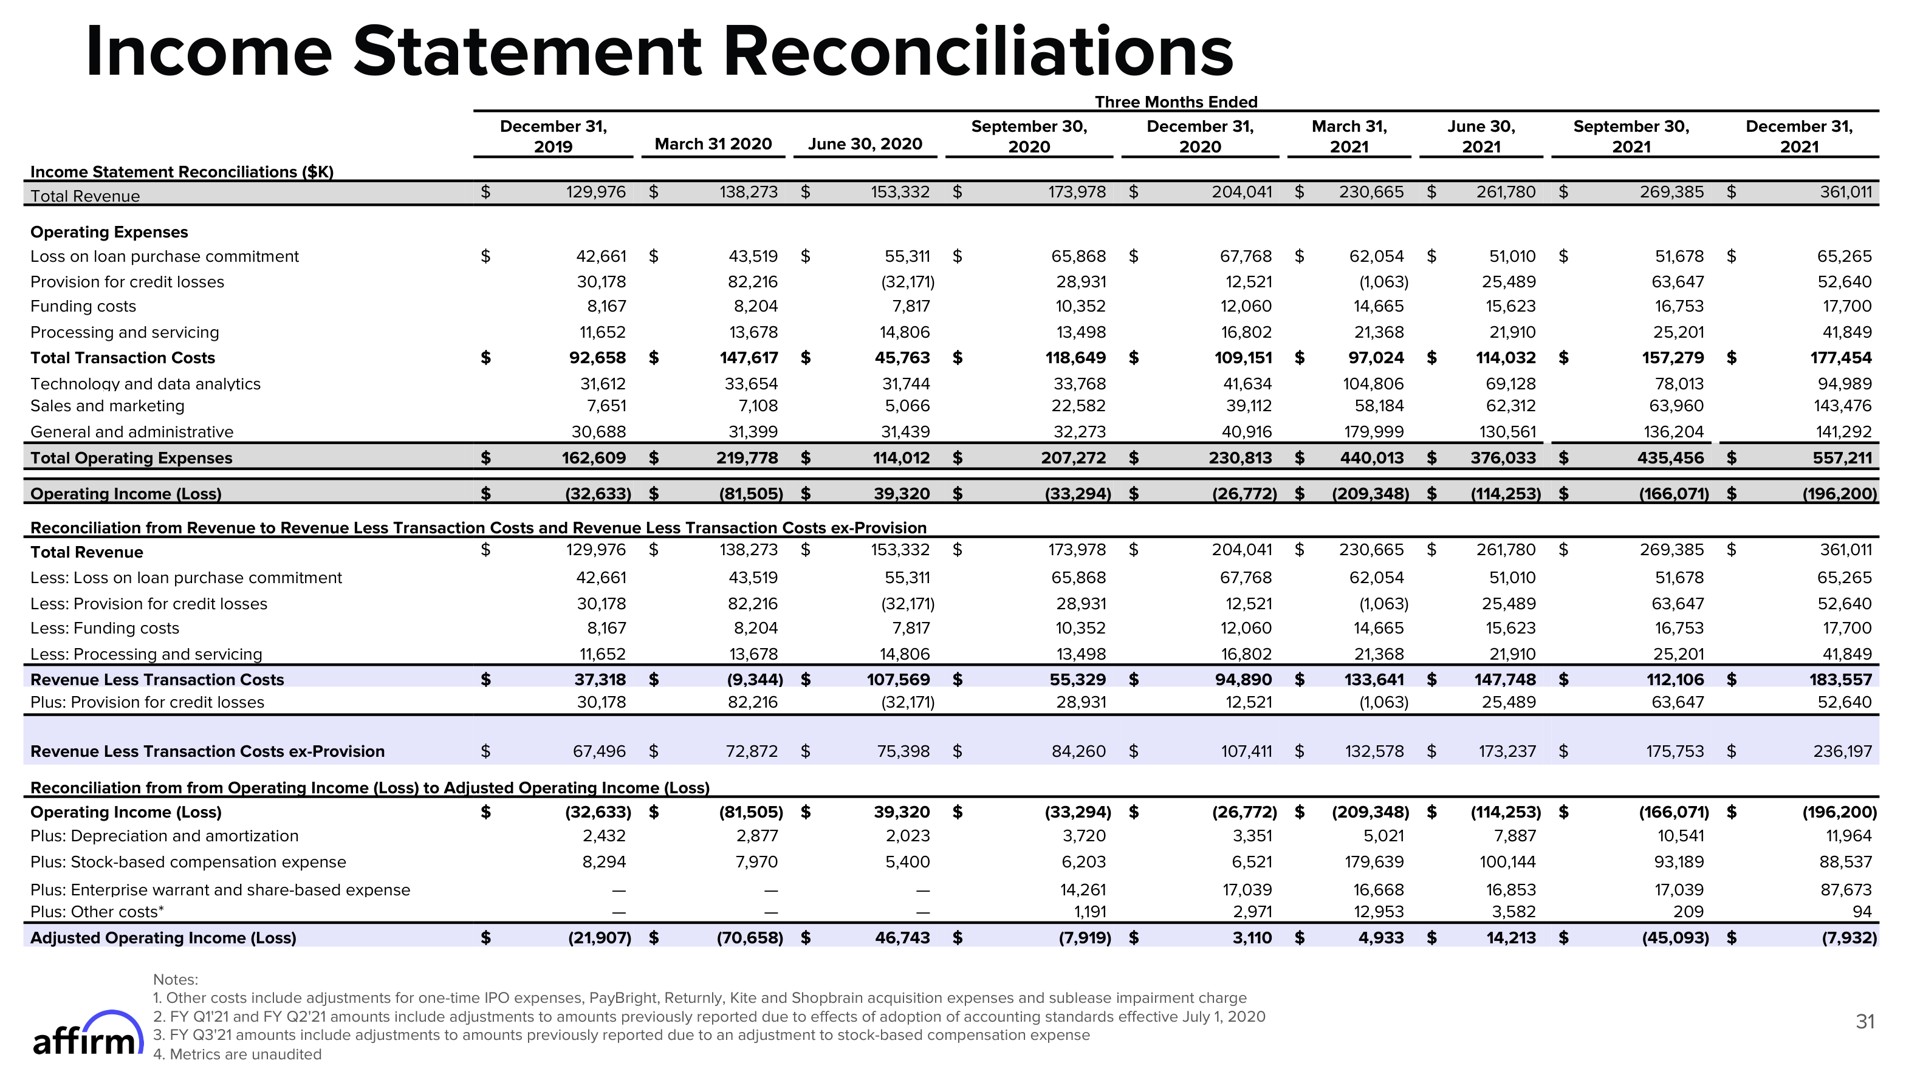 income statement reconciliations | Affirm